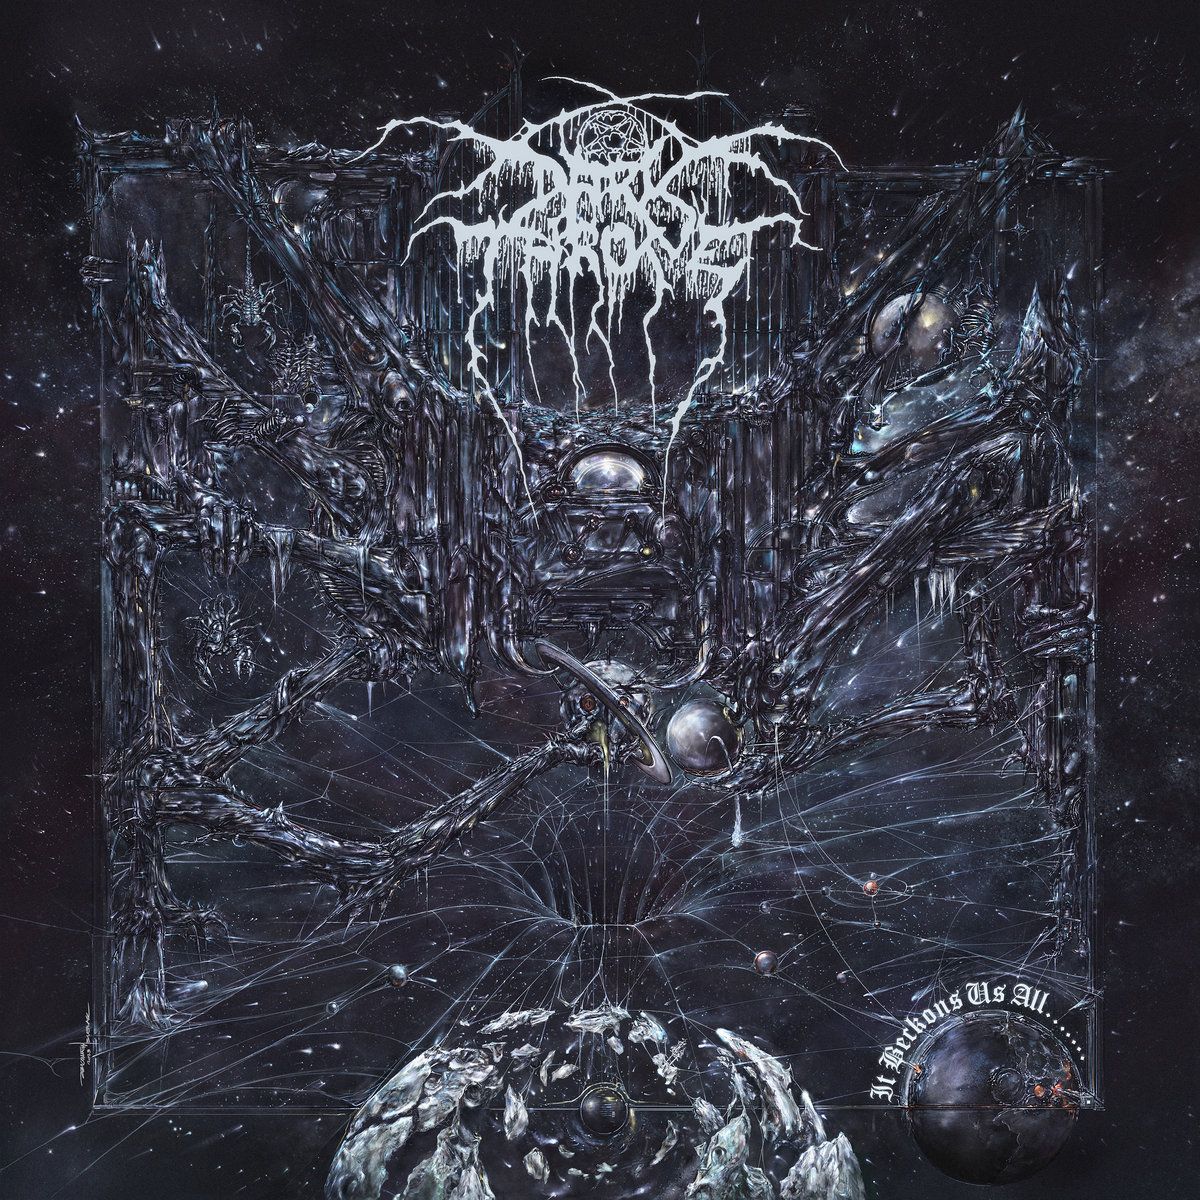 Blackened Heavy Metal icons DARKTHRONE released their new album 'It Beckons Us All' on Apr 26, 2024 via Peaceville Records. What do you think of new album? #darkthrone #itbeckonsusall #blackmetal #heavymetal #metalmusic #extrememetal #metaltwitter #metal @PeacevilleRecs